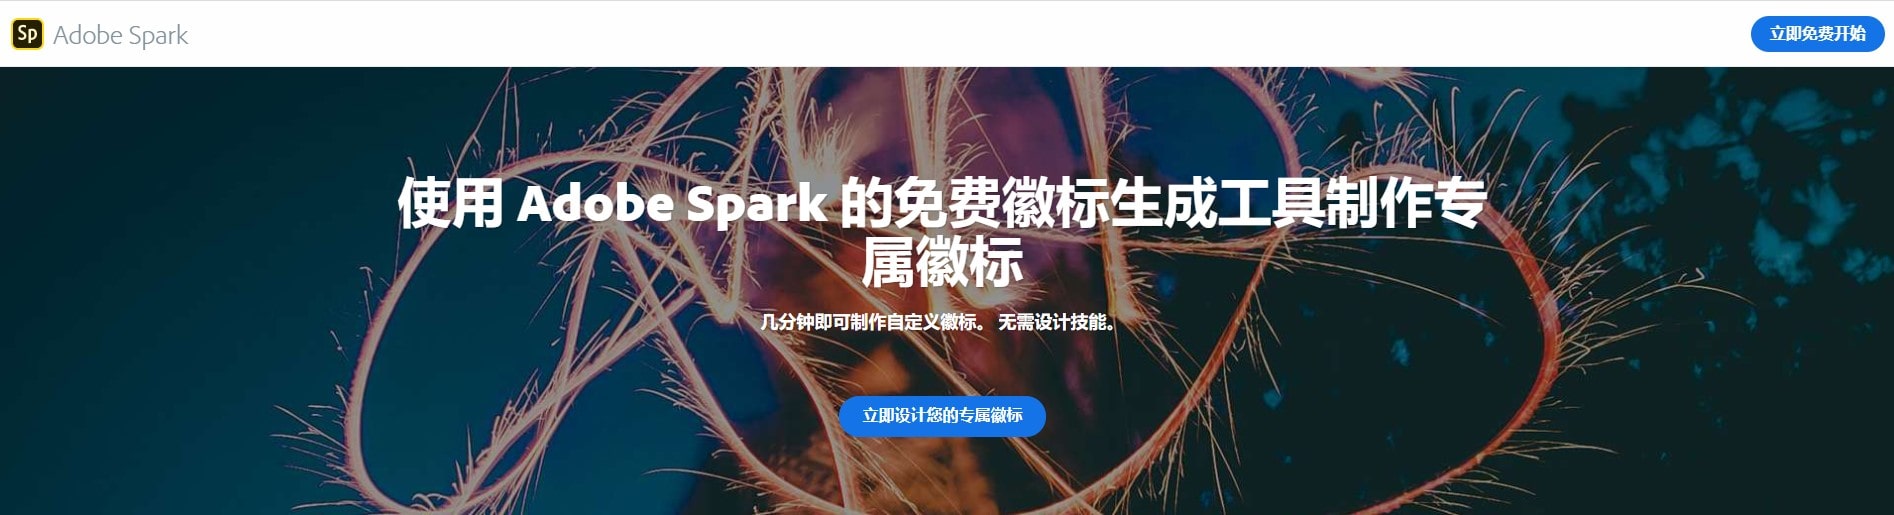 Adobe Spark_overview_zh hans